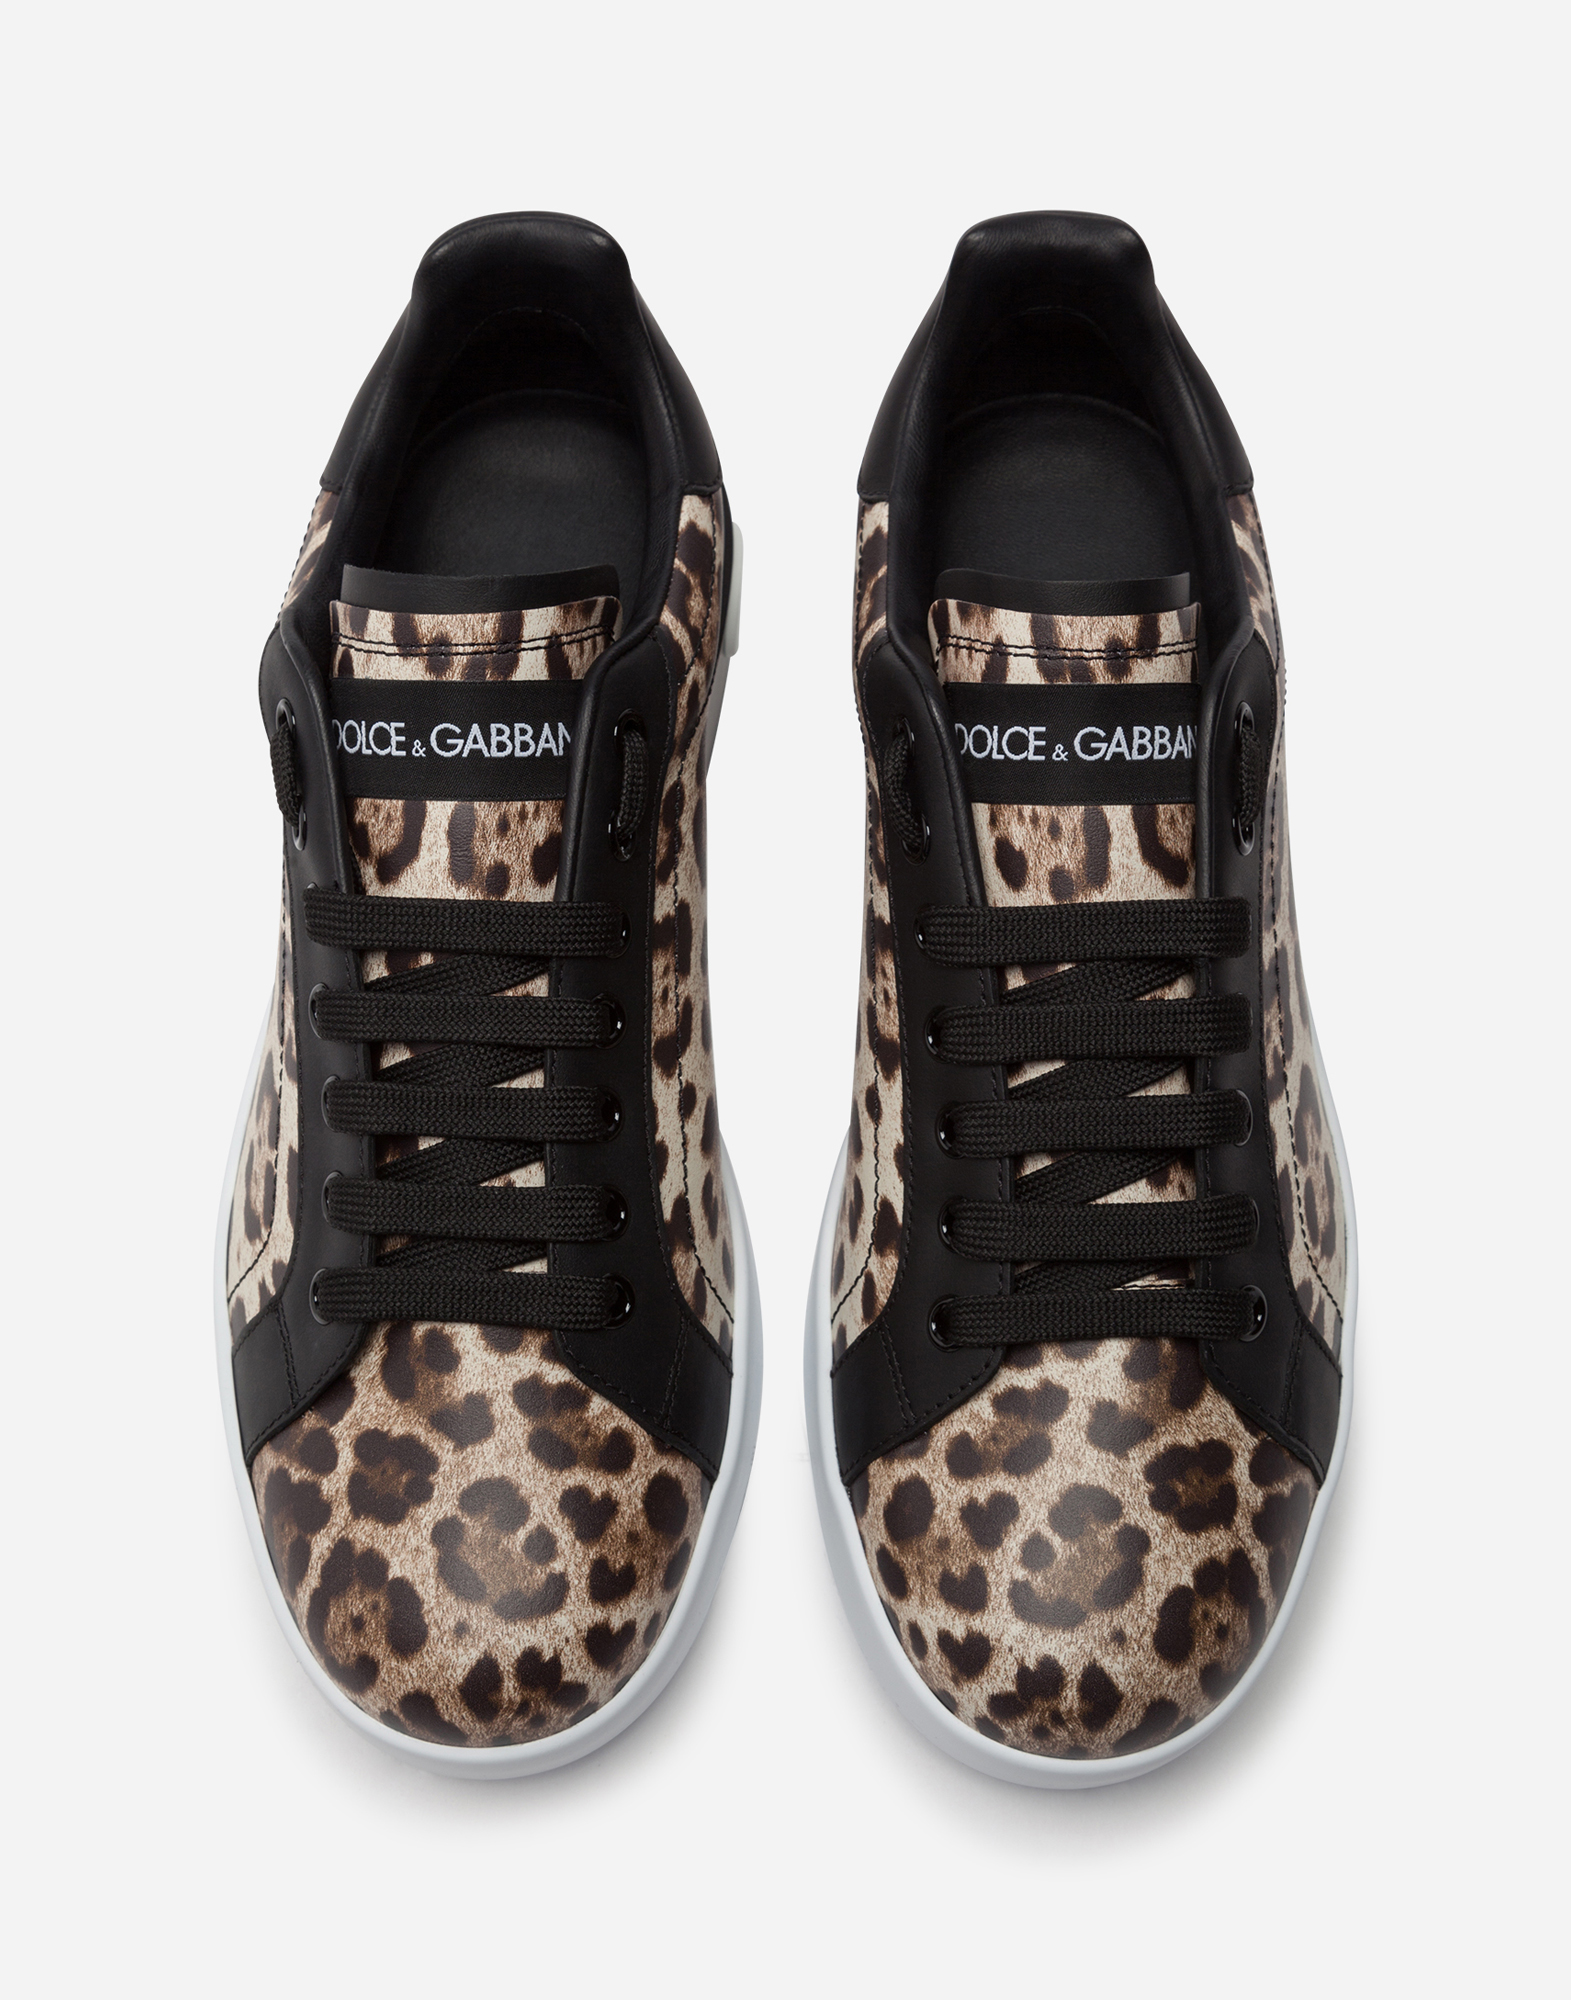 dolce and gabbana leopard shoes